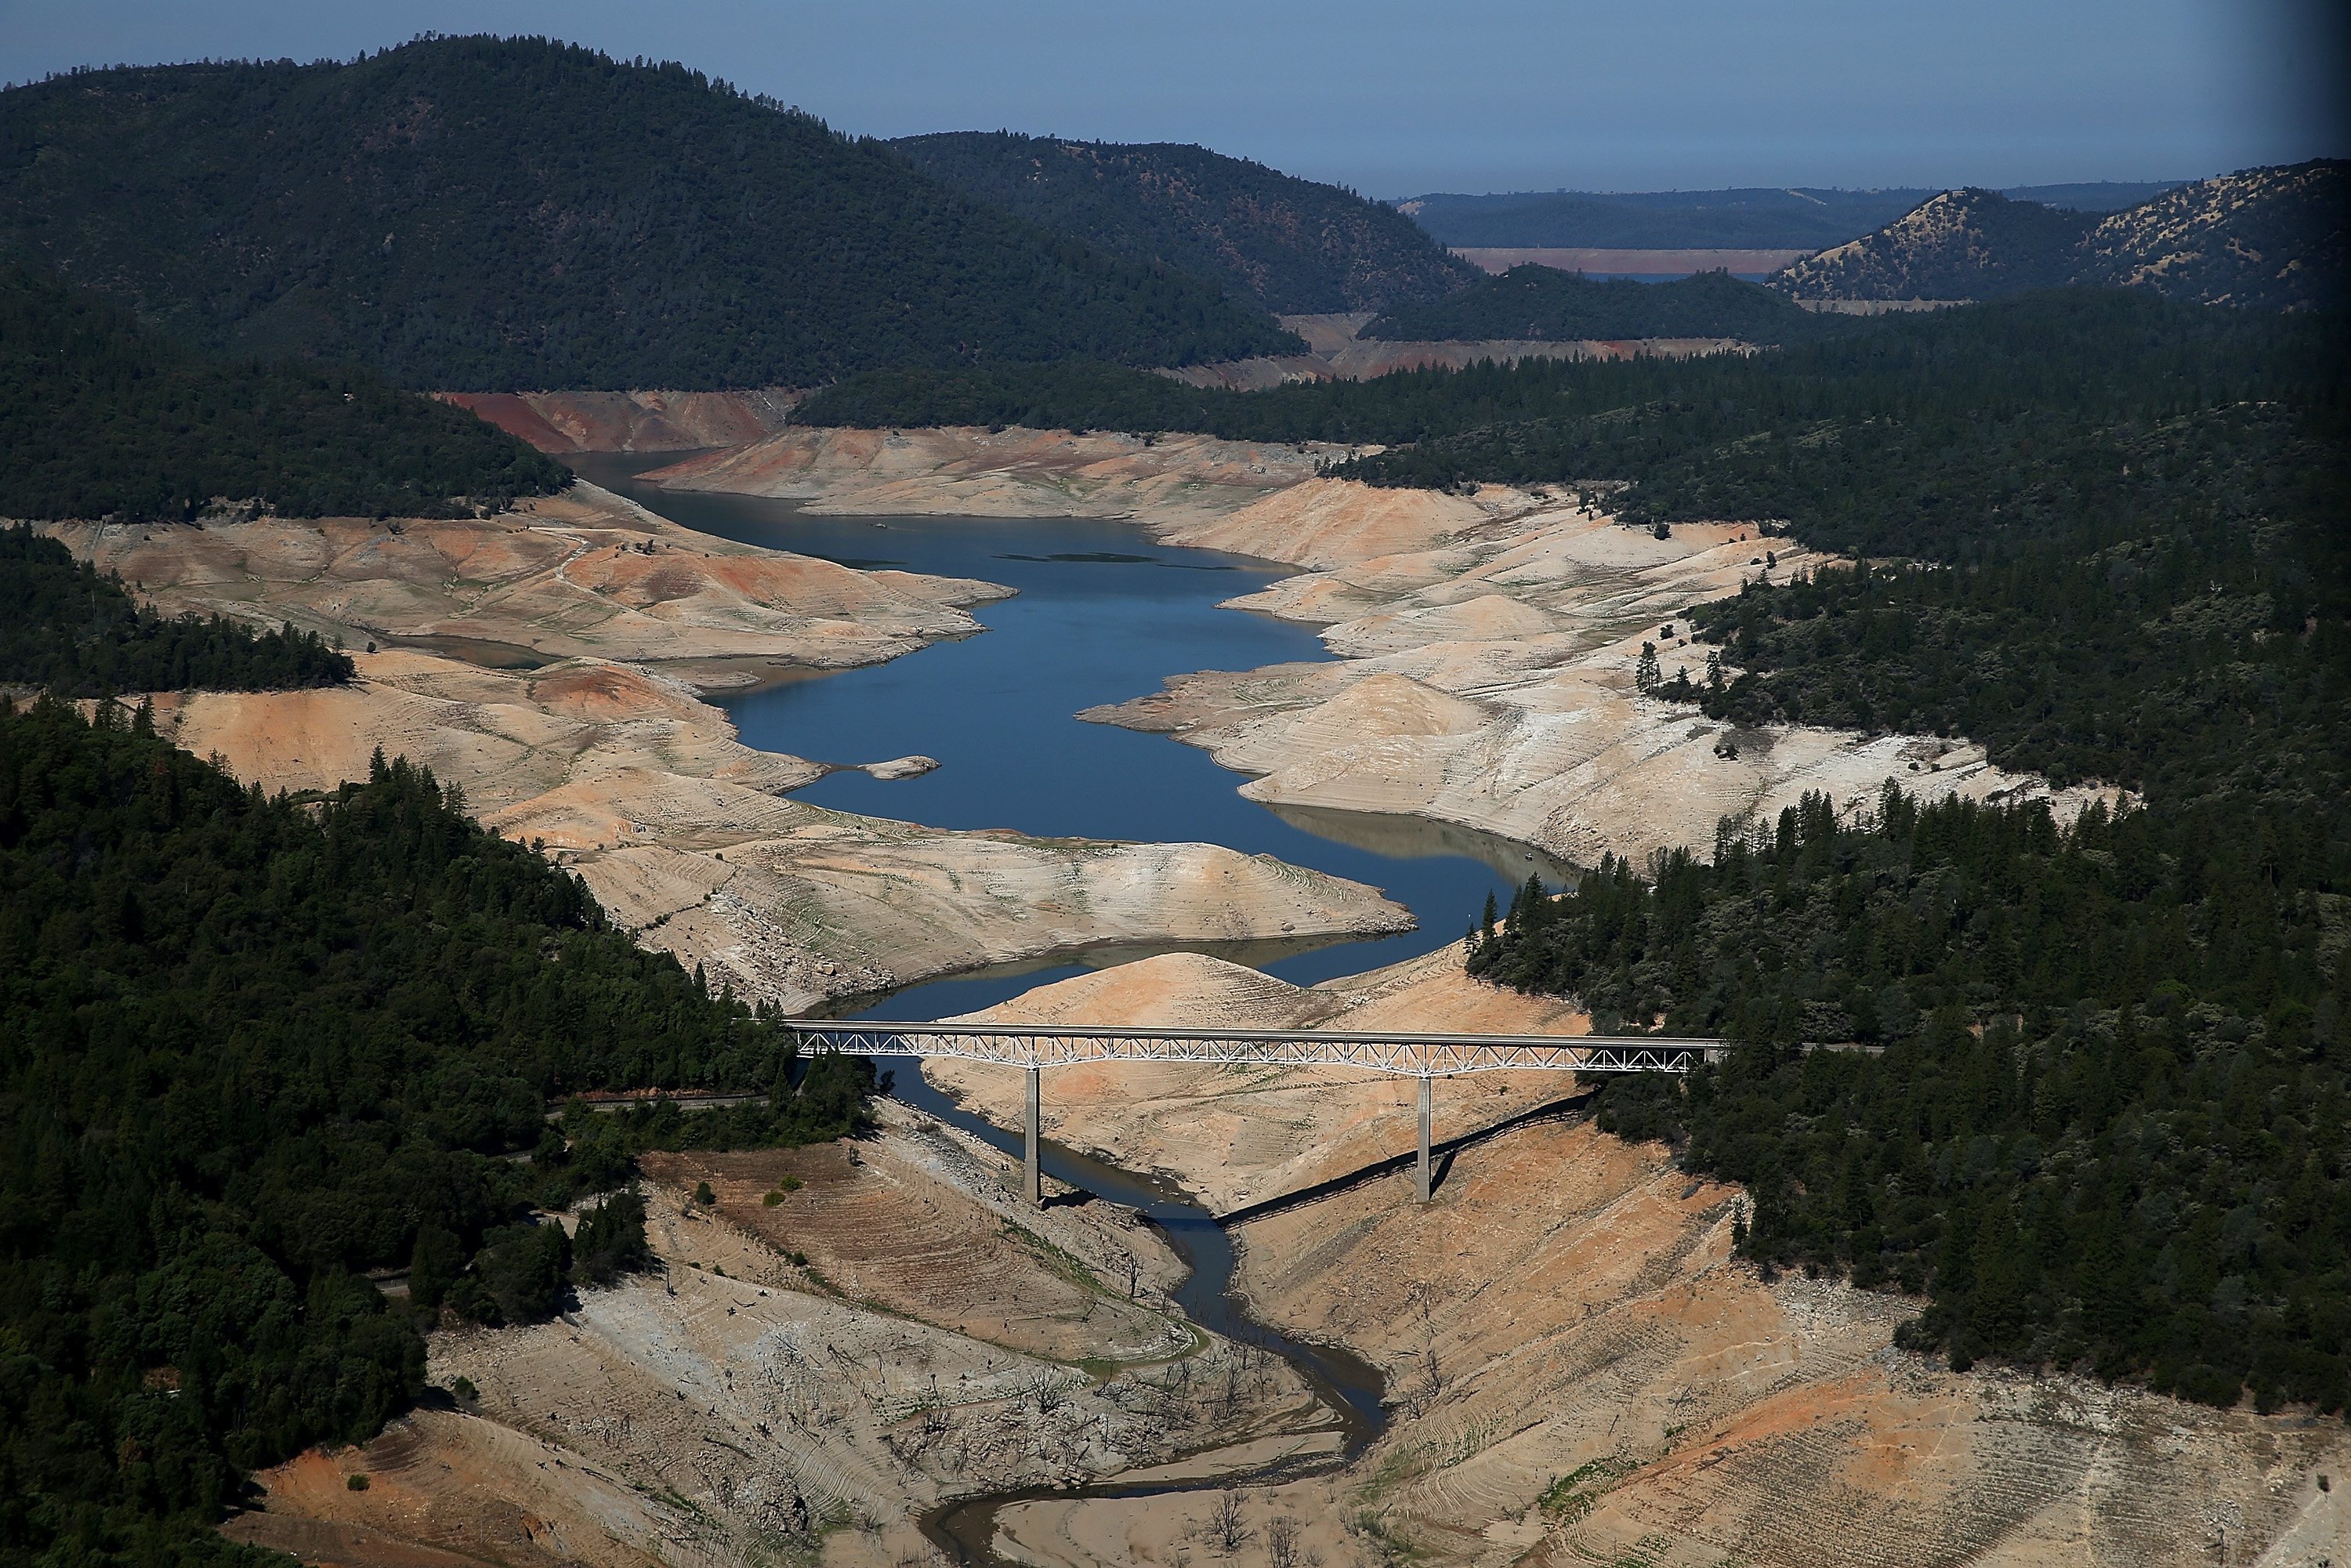 California's Drought California is entering the fourth year of a